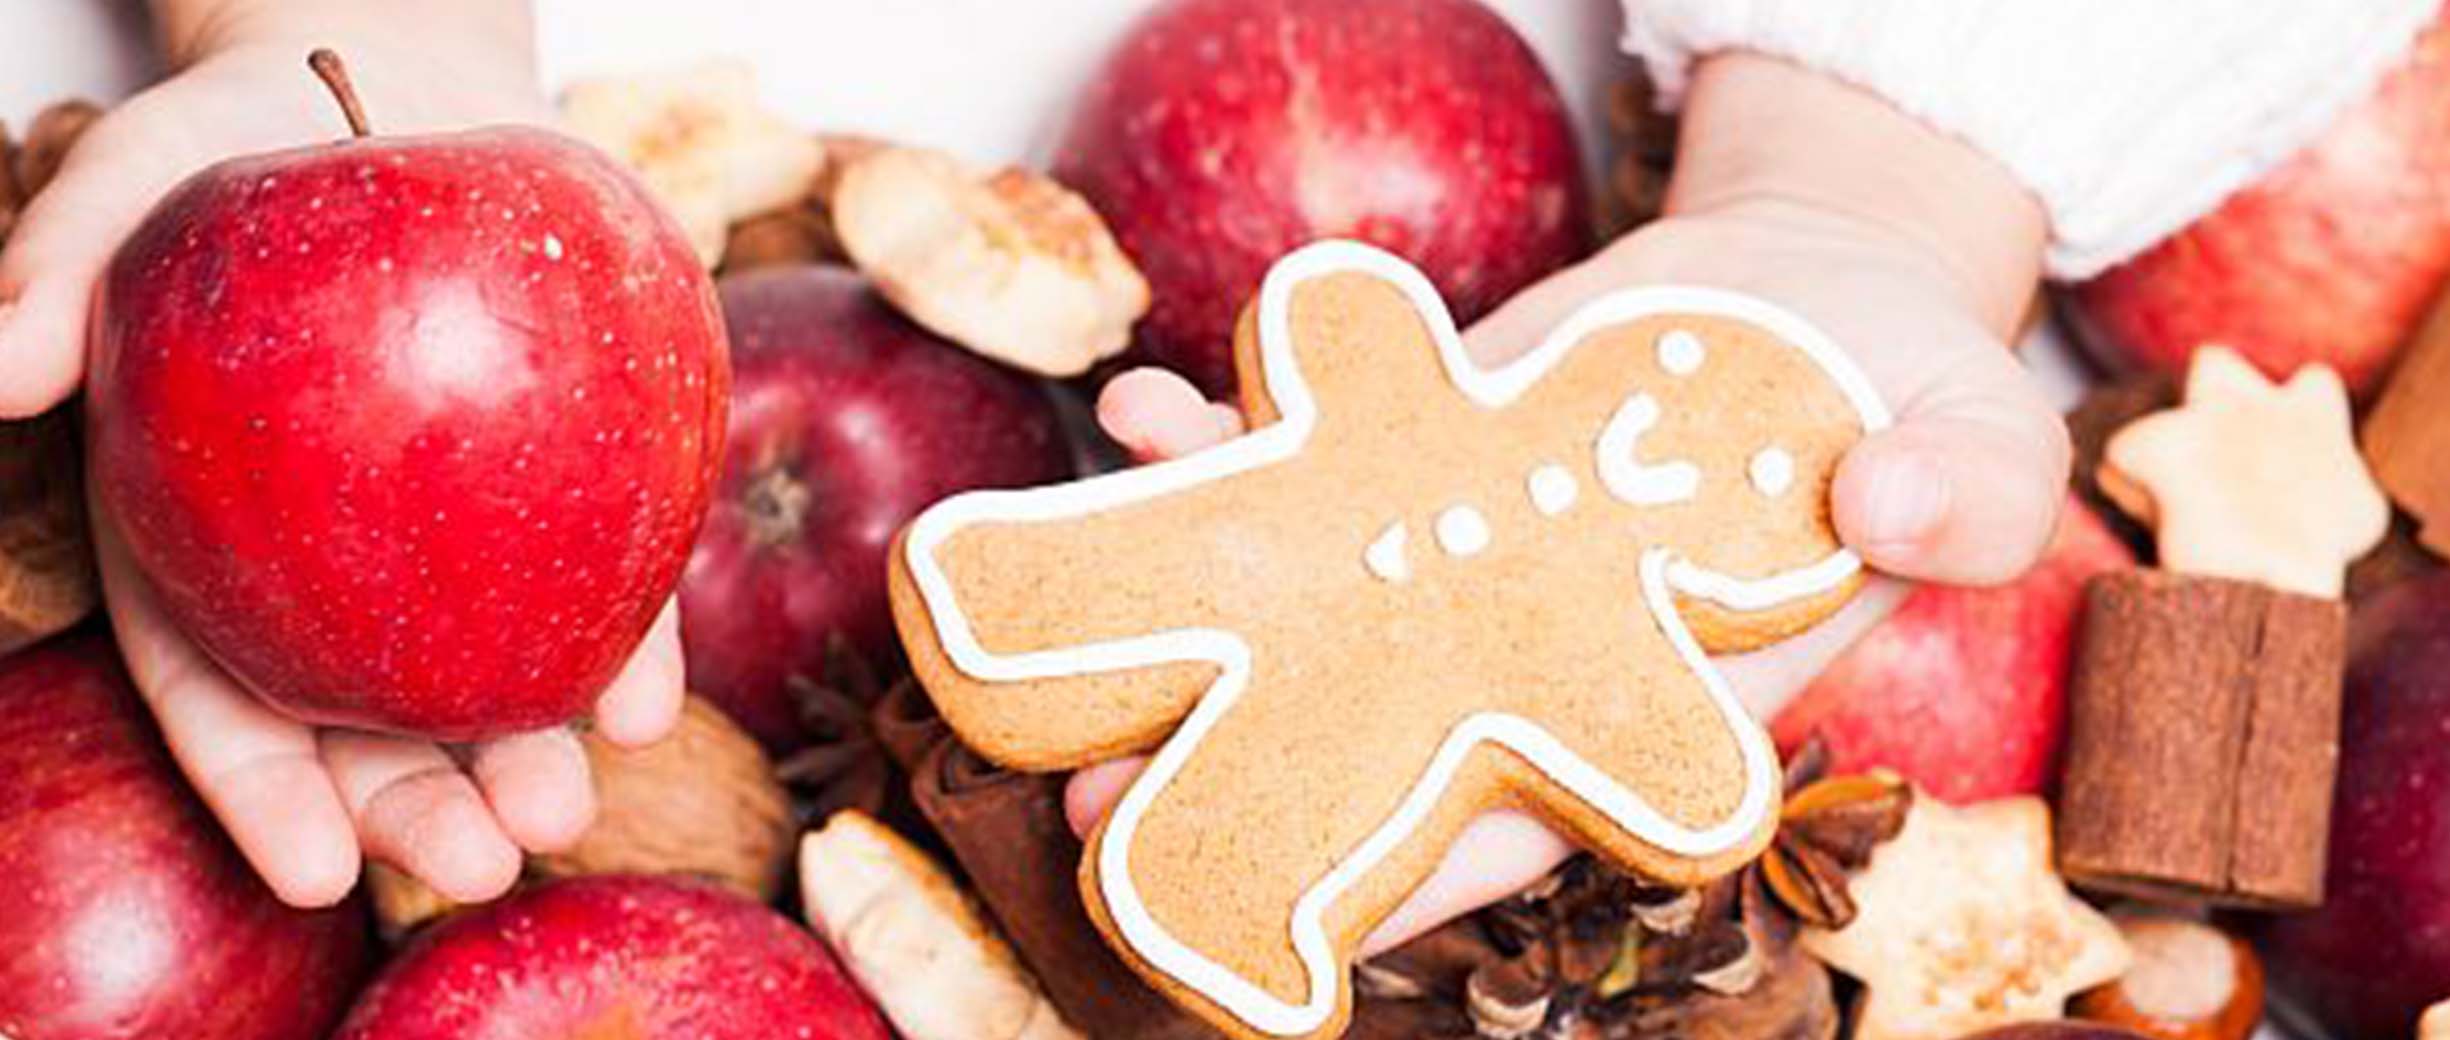 Tips for Eating Healthy(ish) During the Holidays